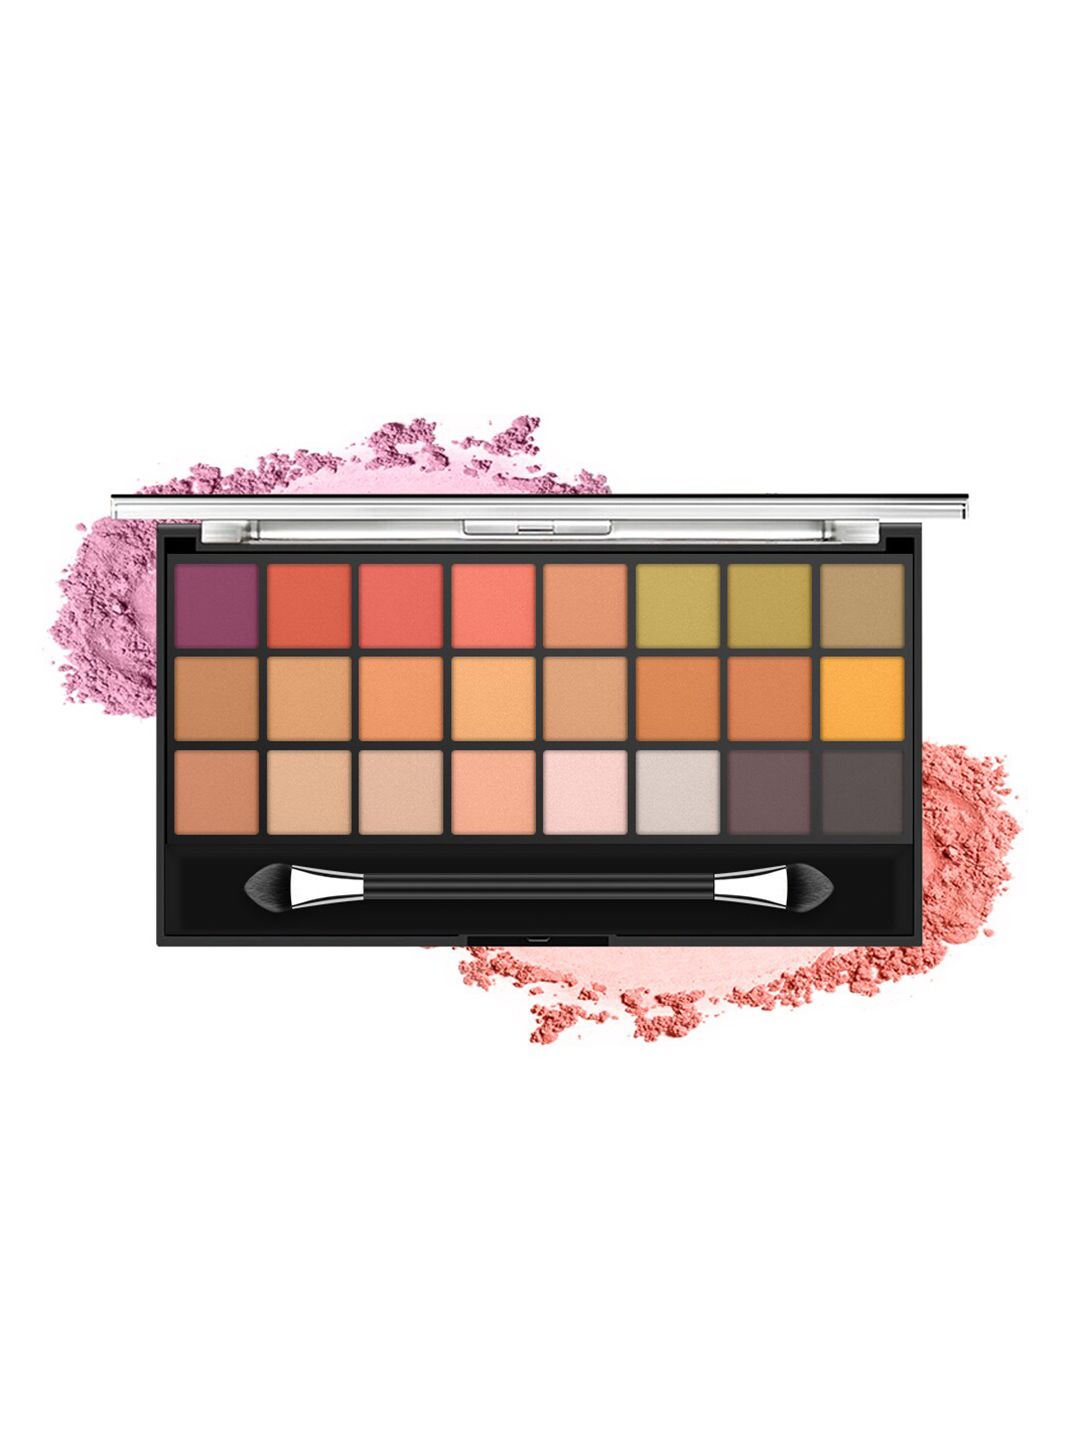 MISS ROSE Metalic 24 Color Matte Eyeshadow Palette Price in India